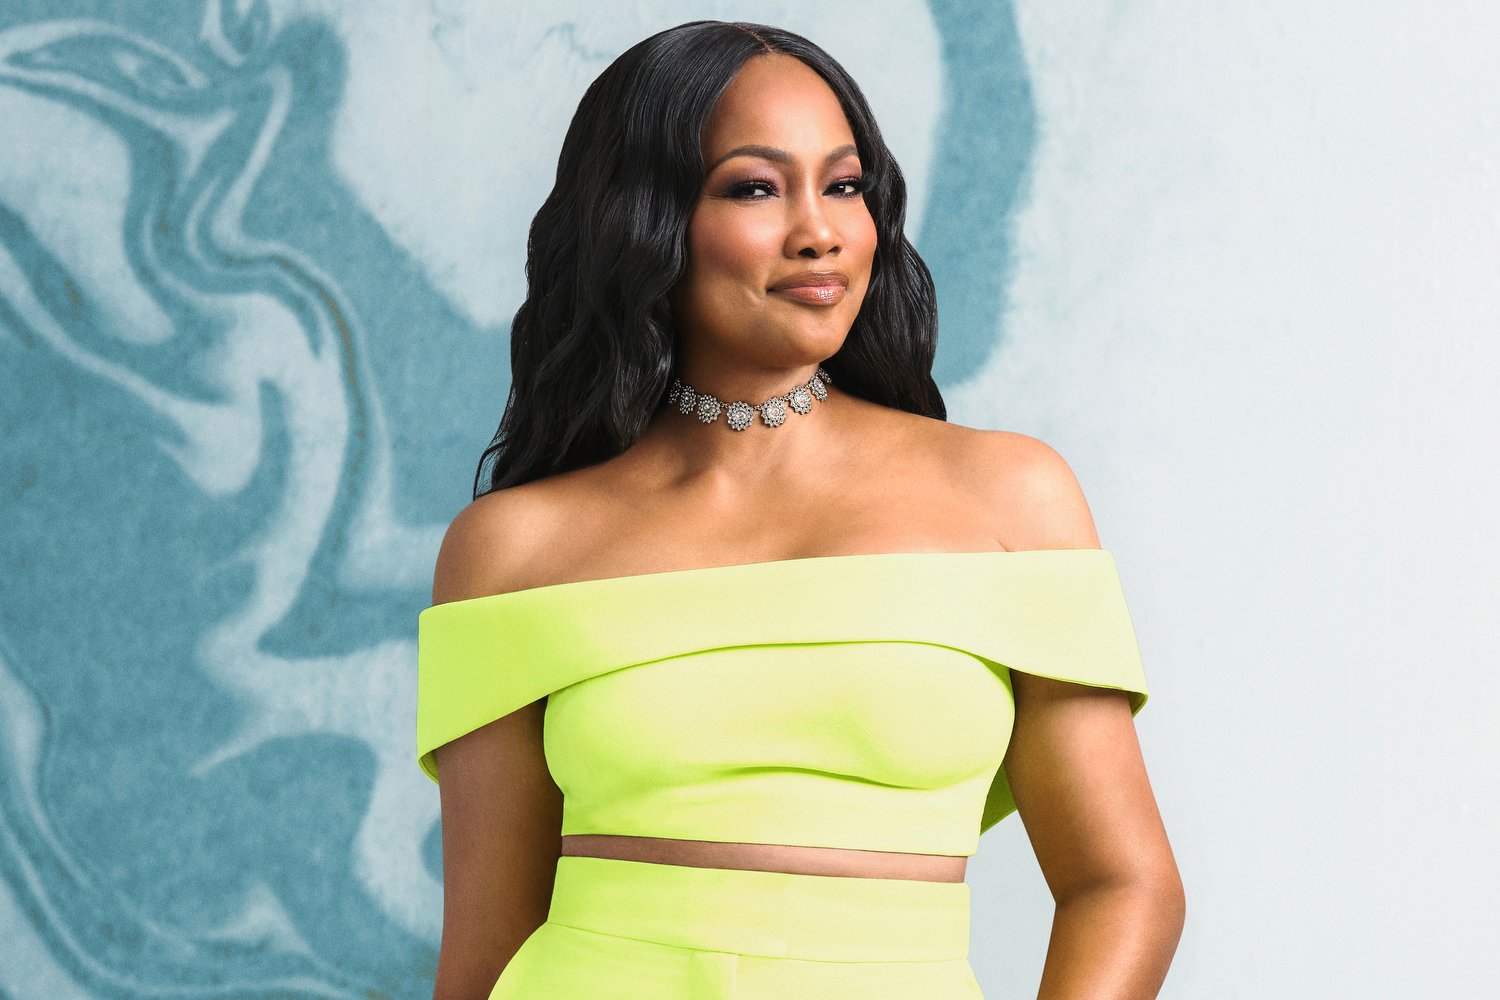 Garcelle Beauvais on 'The Real Housewives of Beverly Hills'